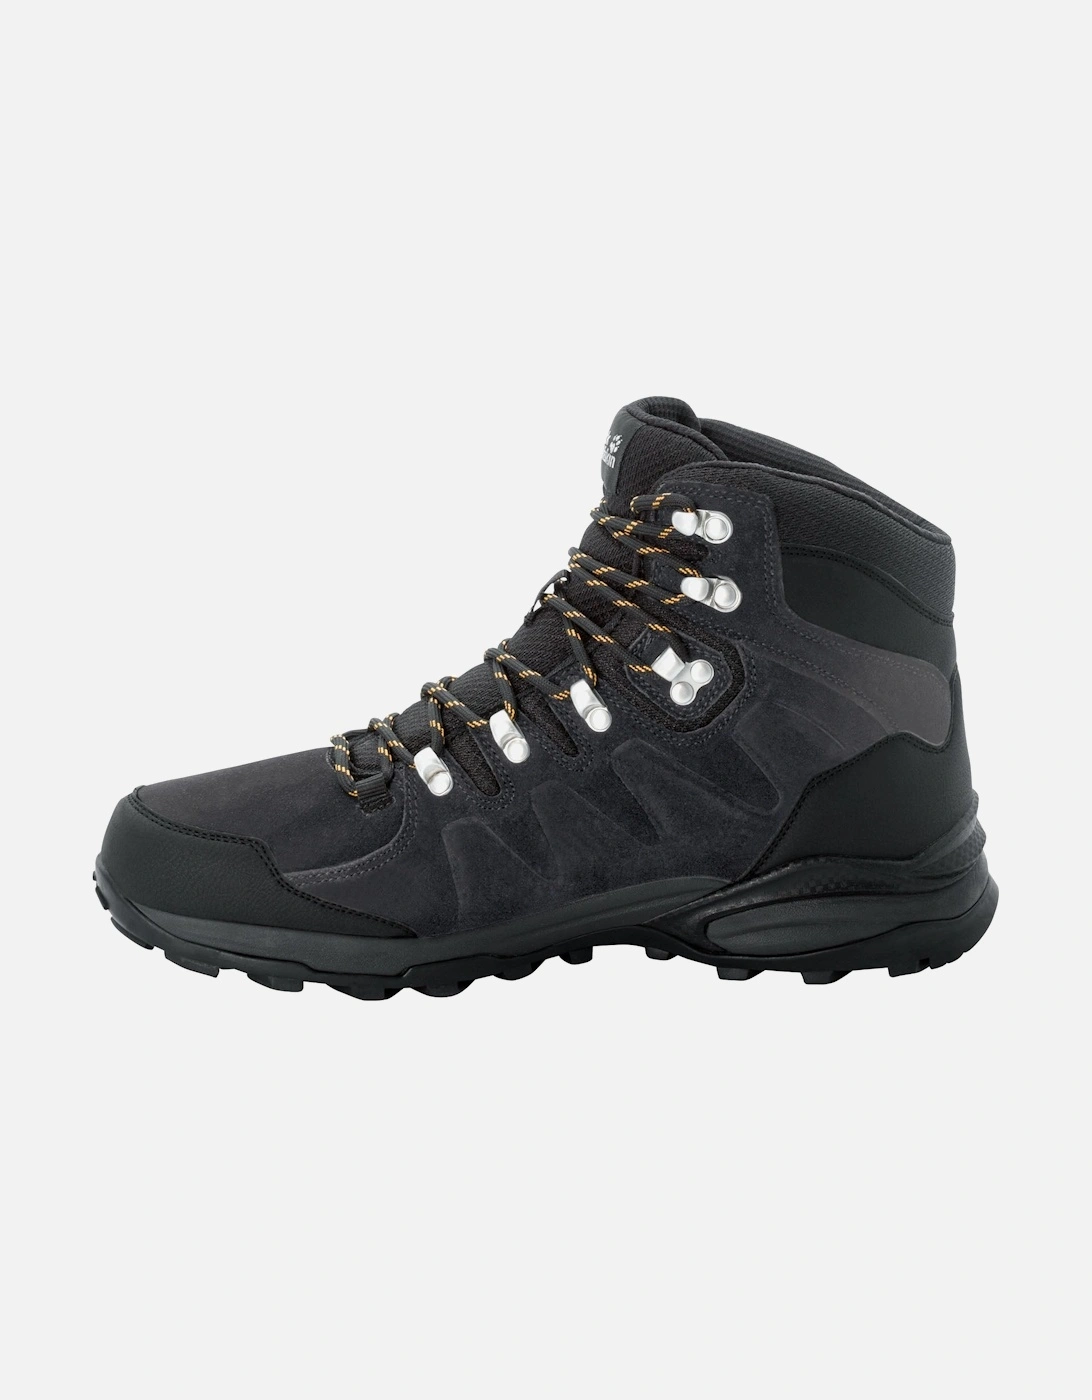 Mens Refugio Texapore Waterproof Leather Walking Boots